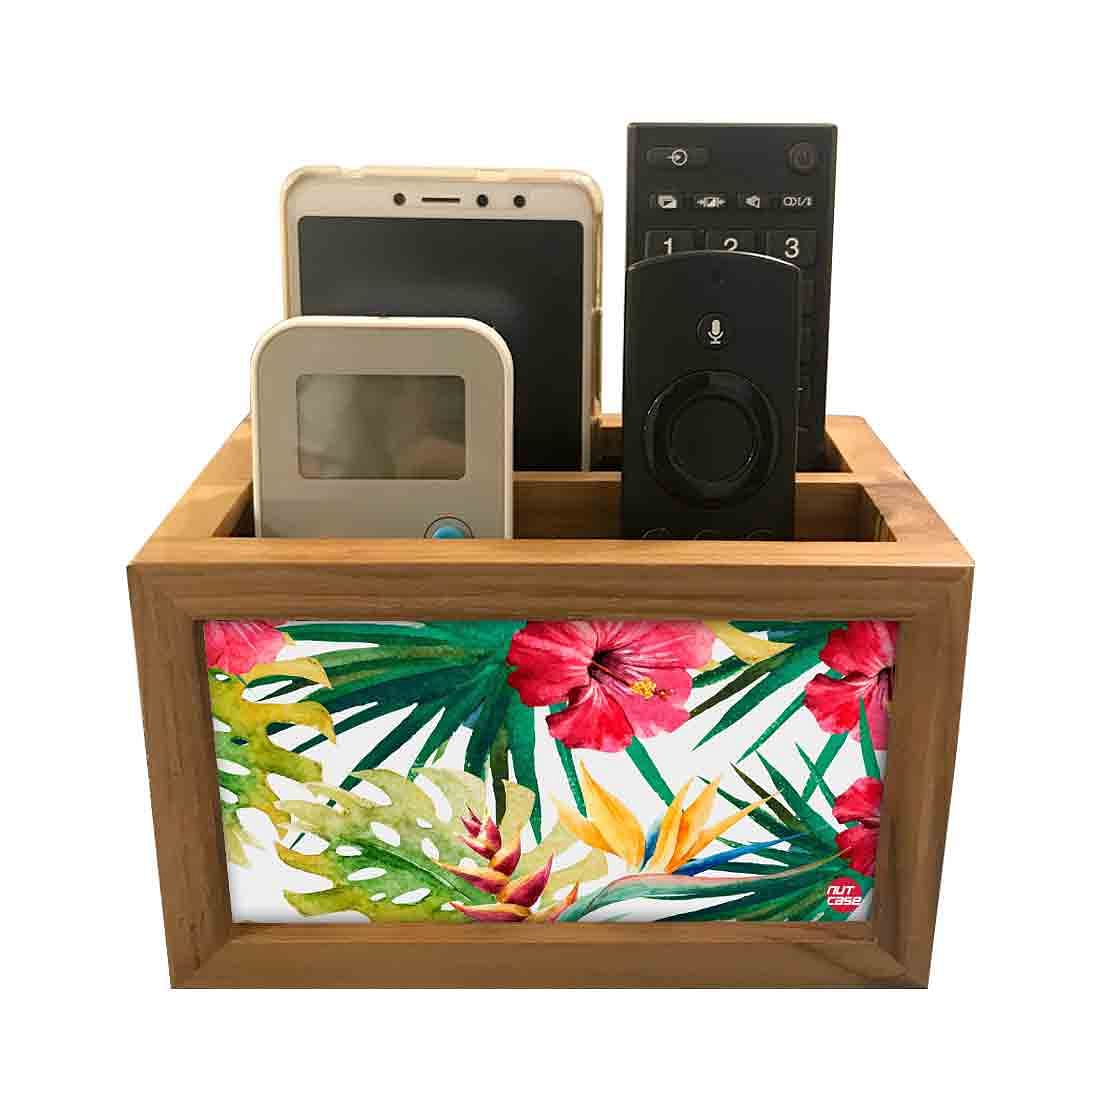 Floral Remote Control Stand For TV / AC Remotes -  Hibiscus Leaves Nutcase